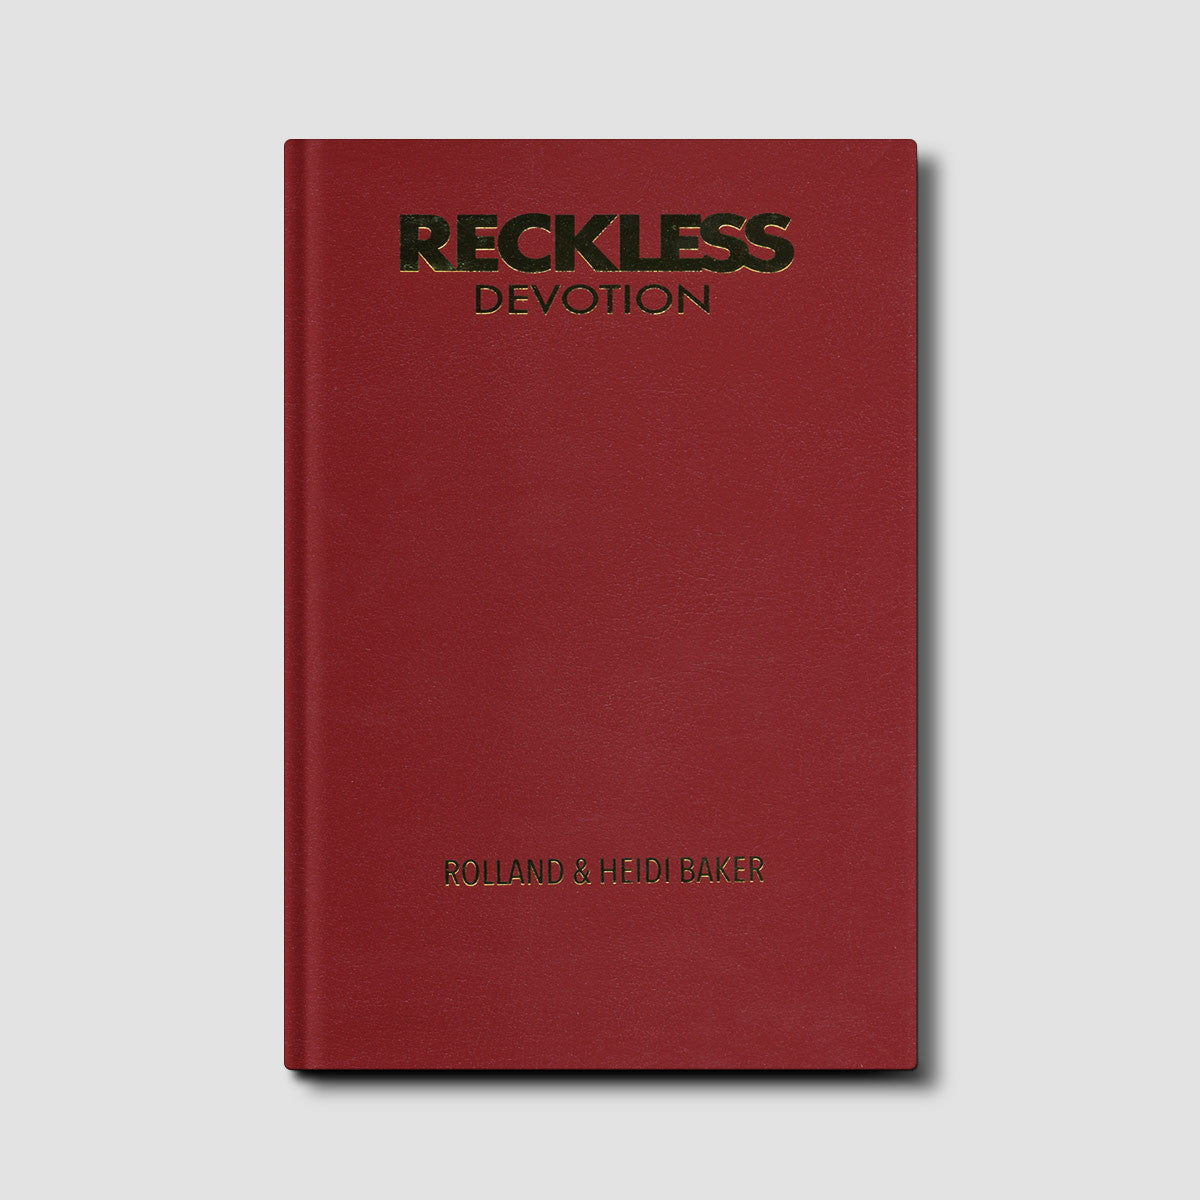 Reckless Devotion Limited Special Edition